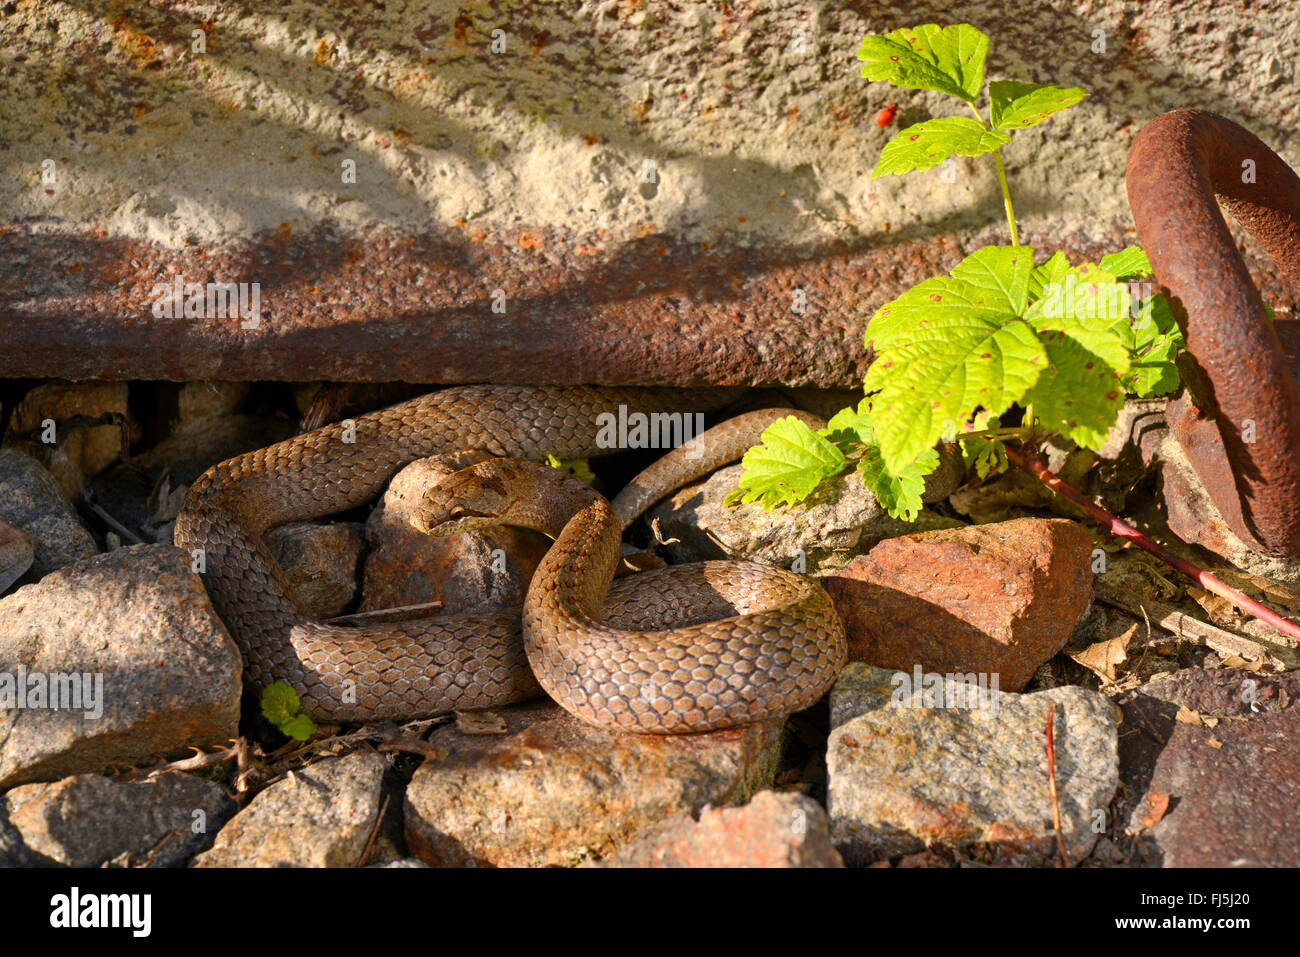 smooth snake (Coronella austriaca), smooth snake sunbathing in the track bed, Germany, Bavaria Stock Photo